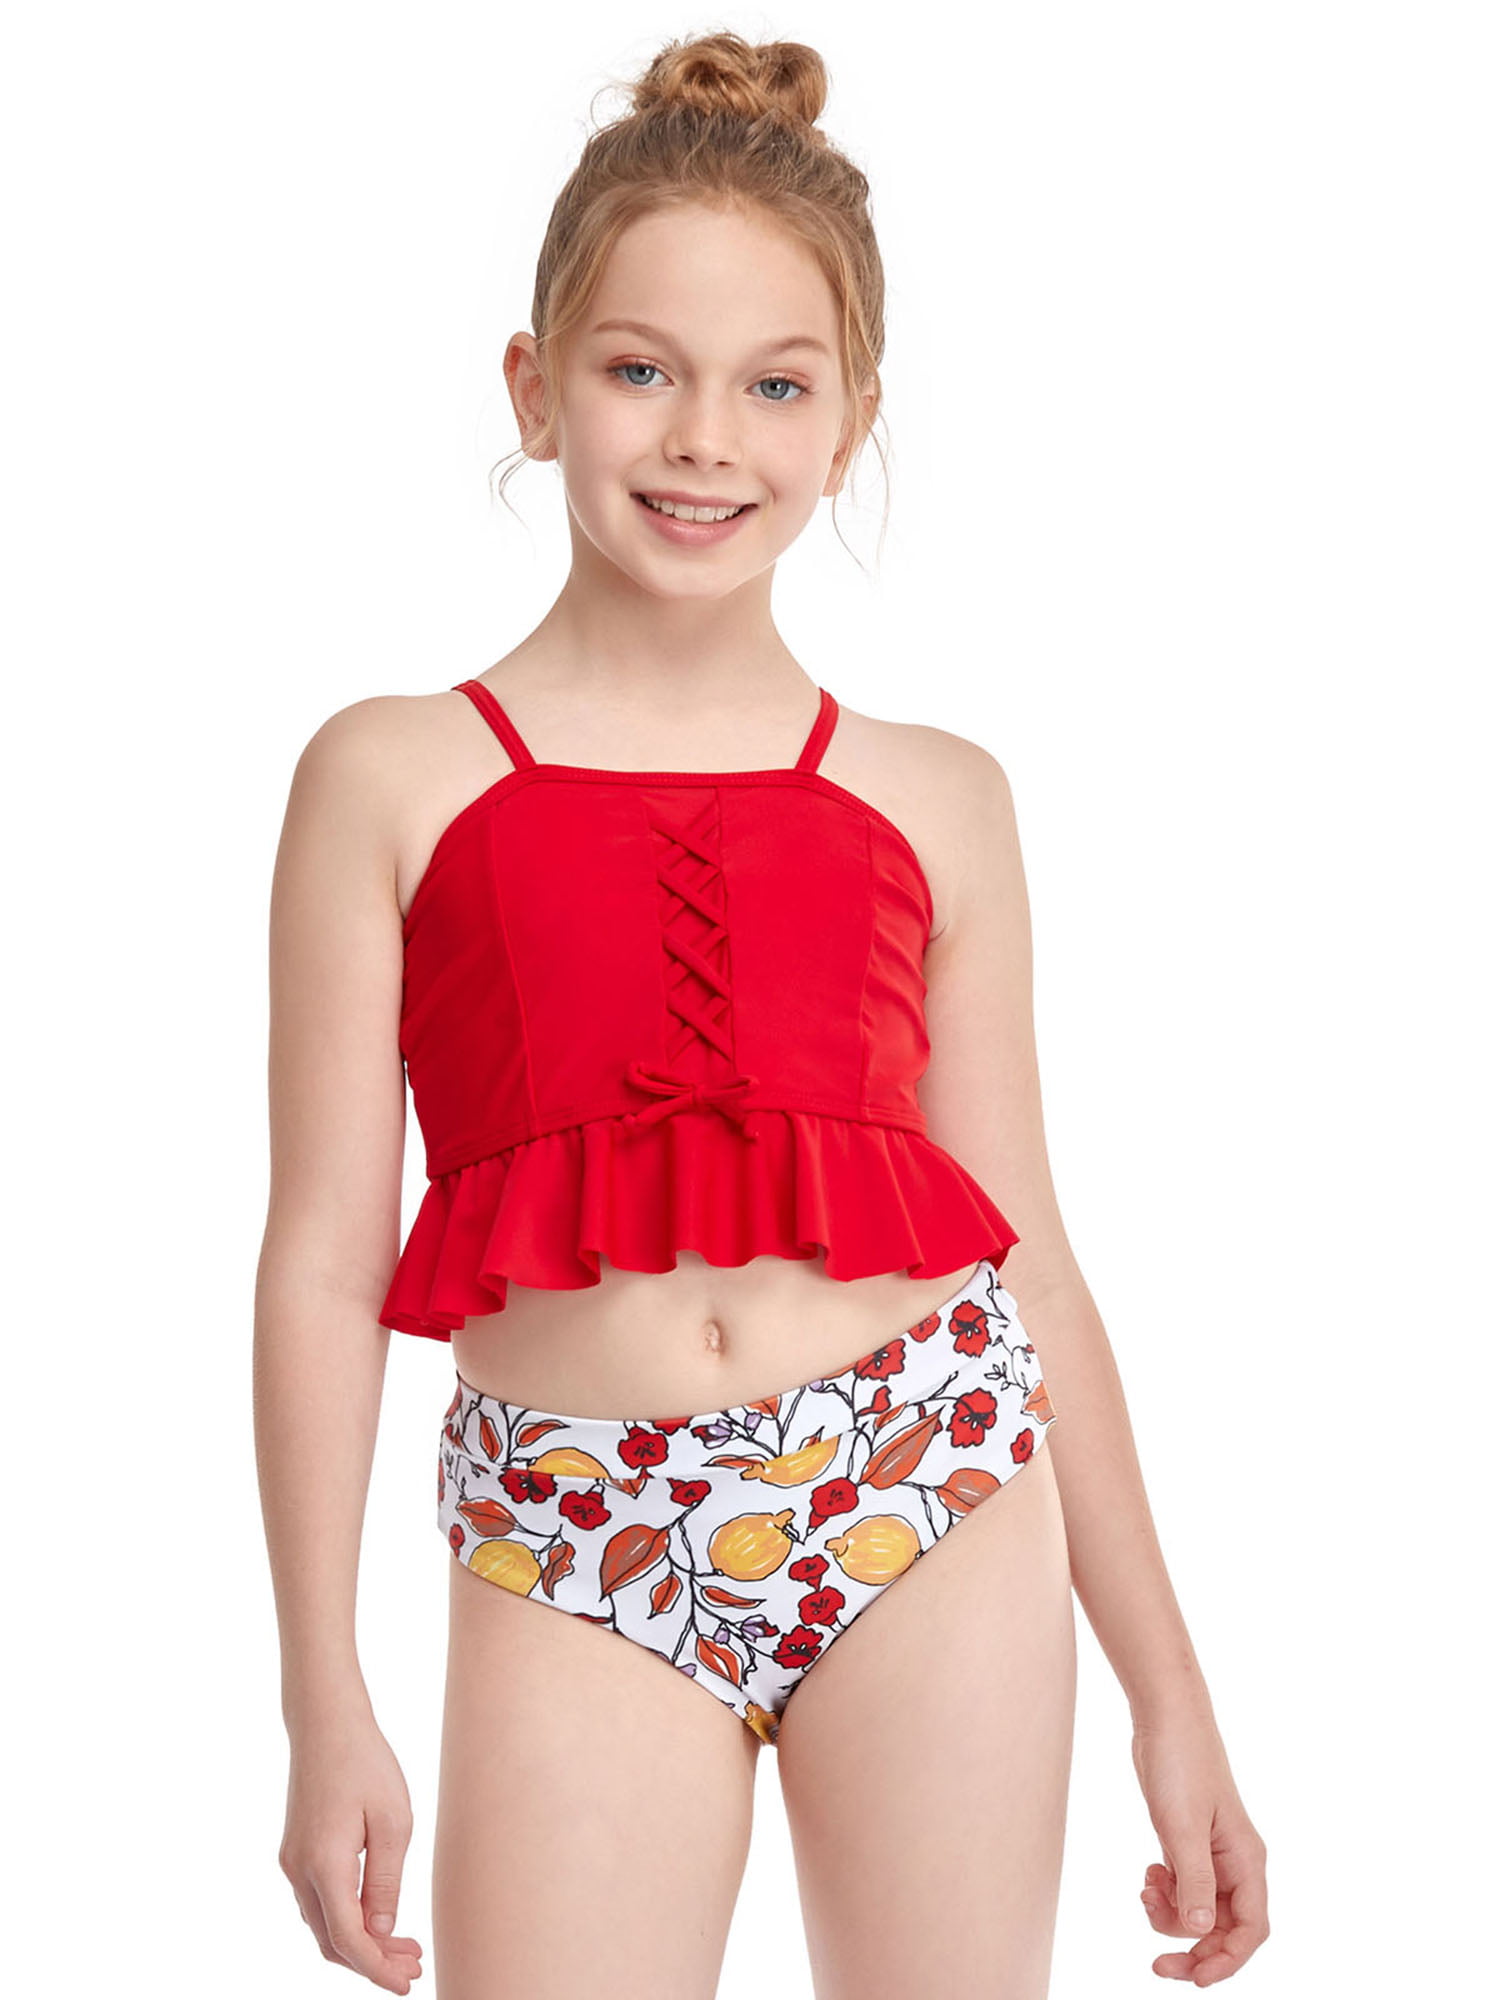 JYYYBF Mommy and Me Bathing Suits Adjustable Spaghetti Strap Swimwear Girls  Swimsuit 2 Pieces Hawaii Floral Printed Beach Set Red Girls 10-12 Years -  Walmart.com